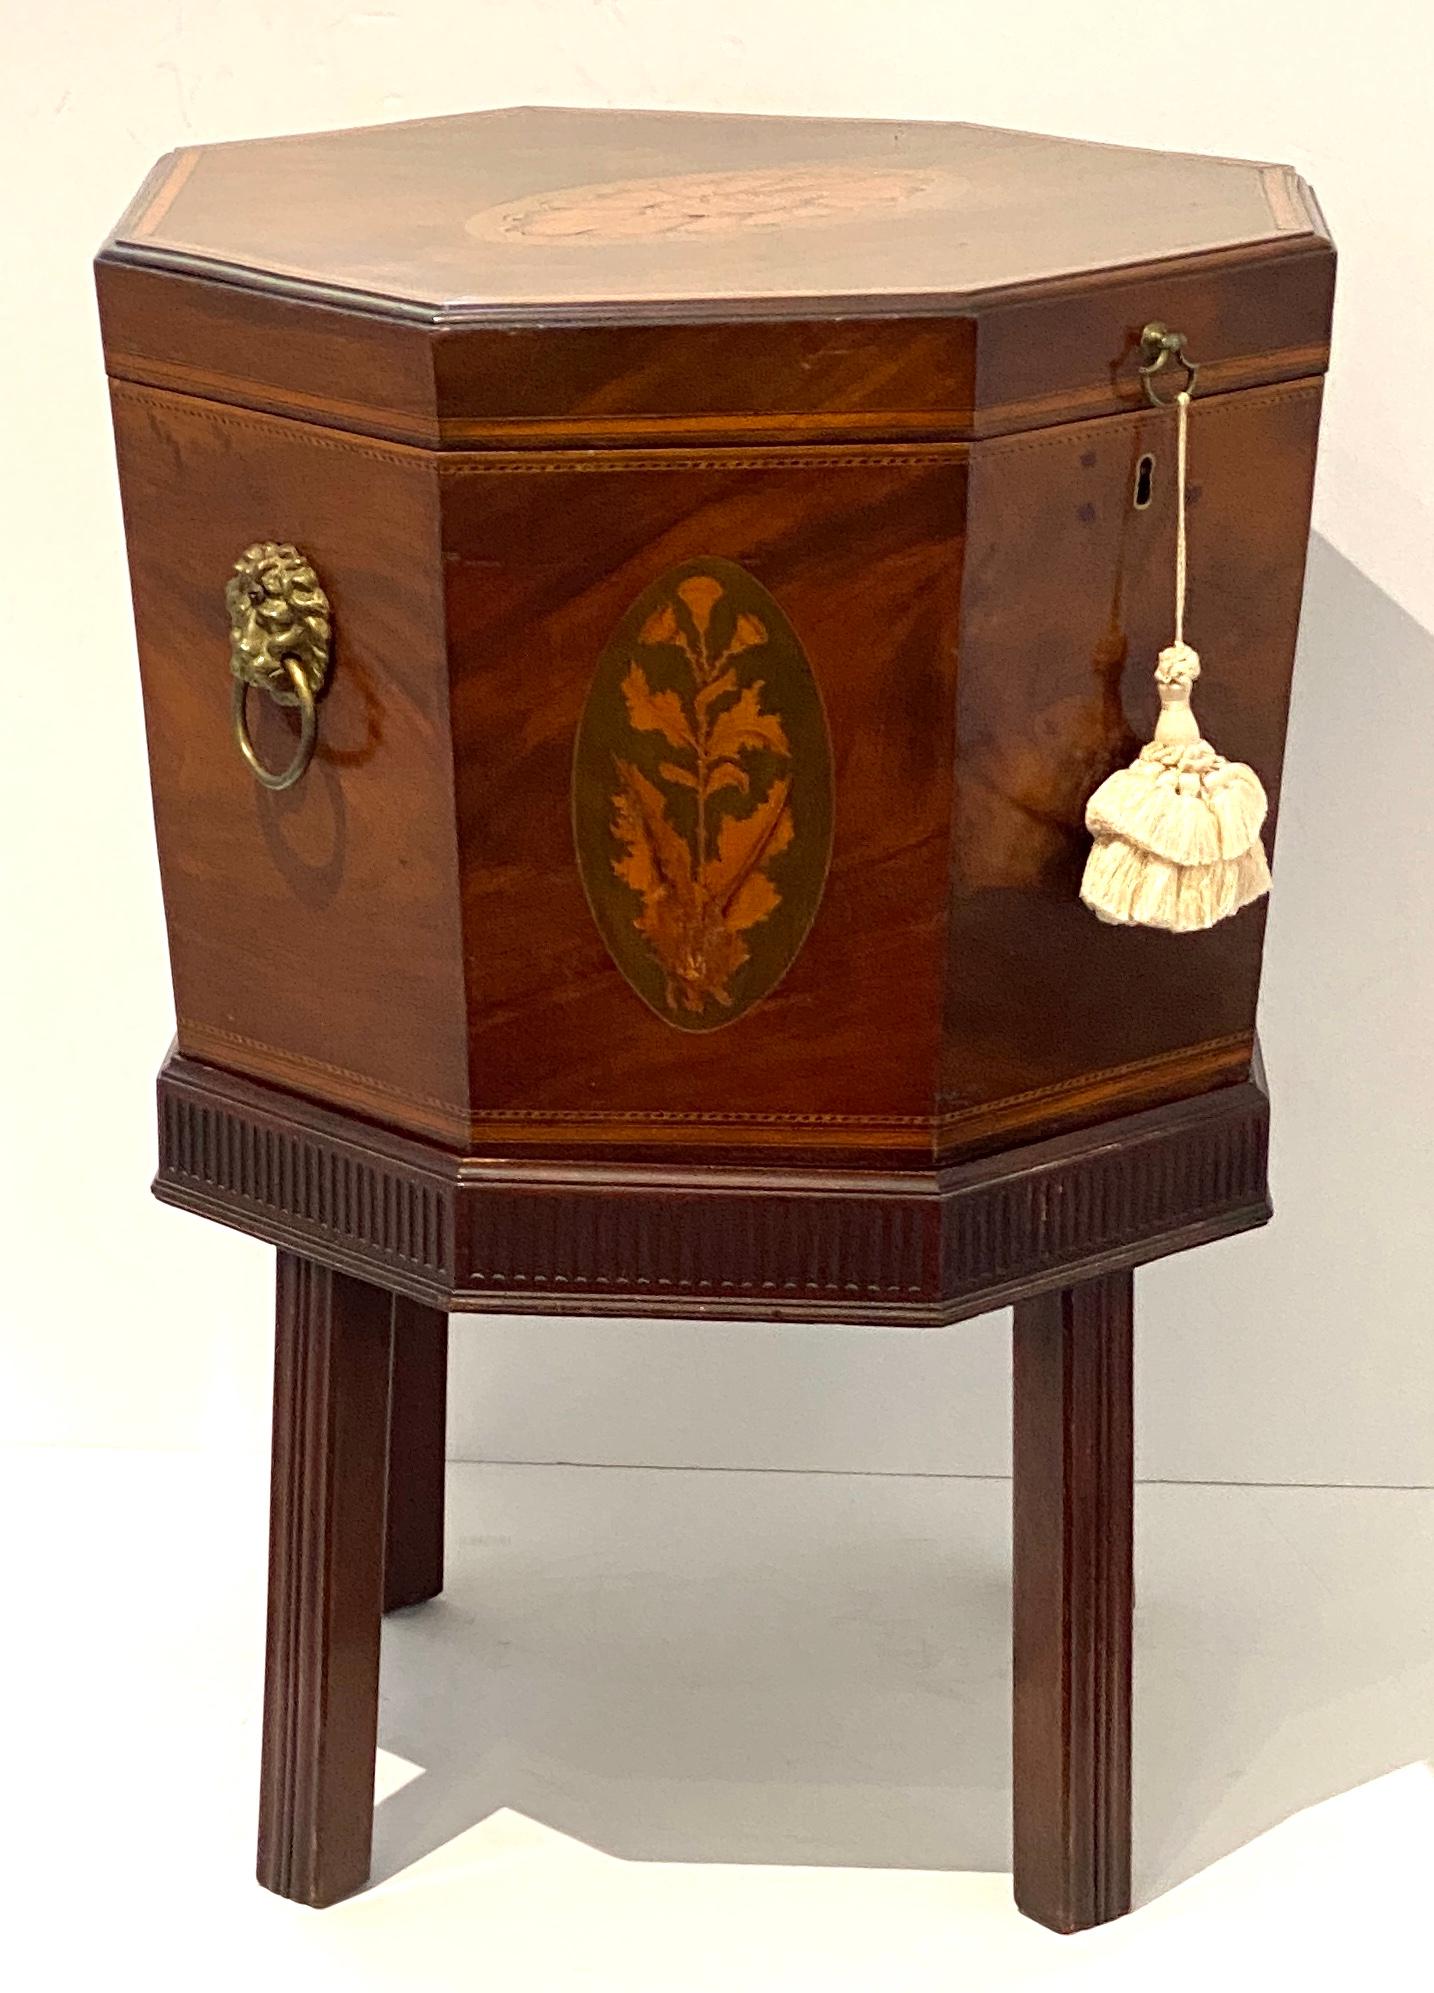 This stylish, 19th century, English hand-crafted George III wine cellarette-on-stand was acquired from an estate in Albany, NY. 

Note: Overall dimensions are 28